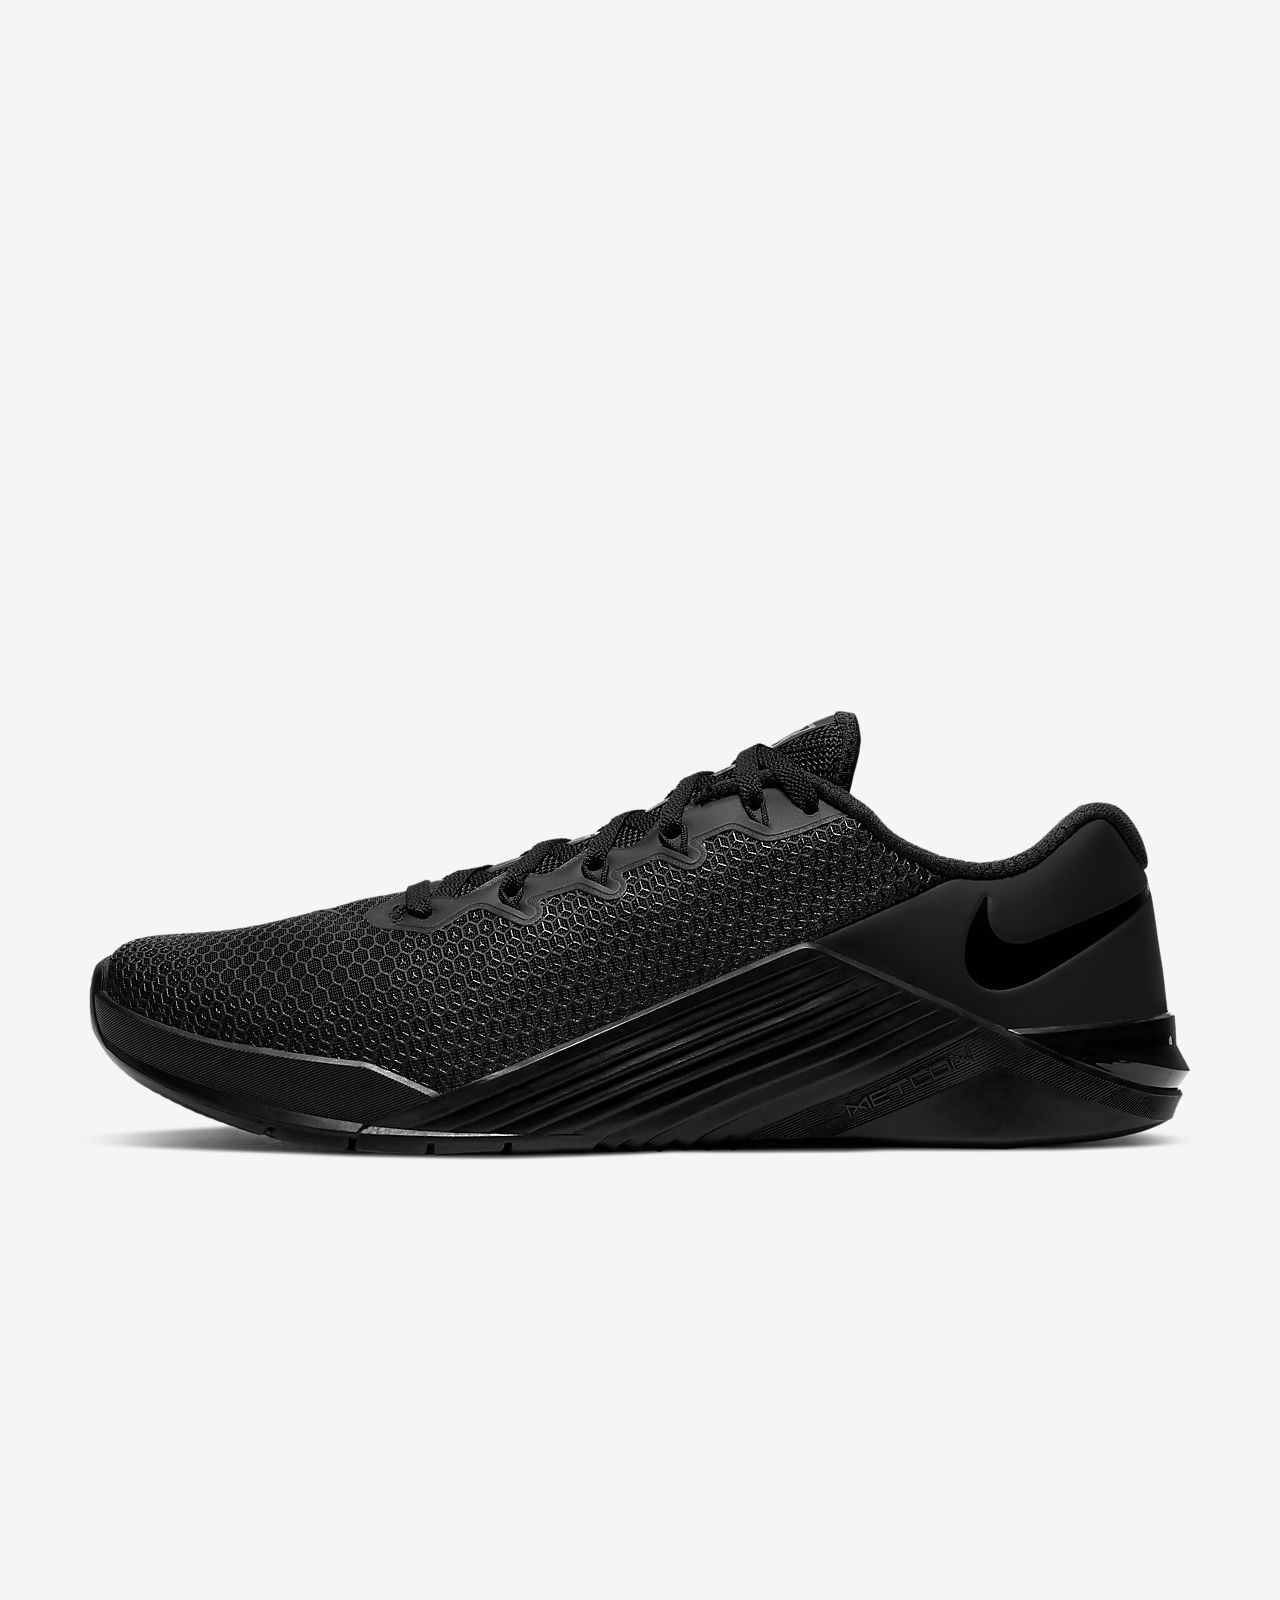 Nike shoes for men: Best Metcons 